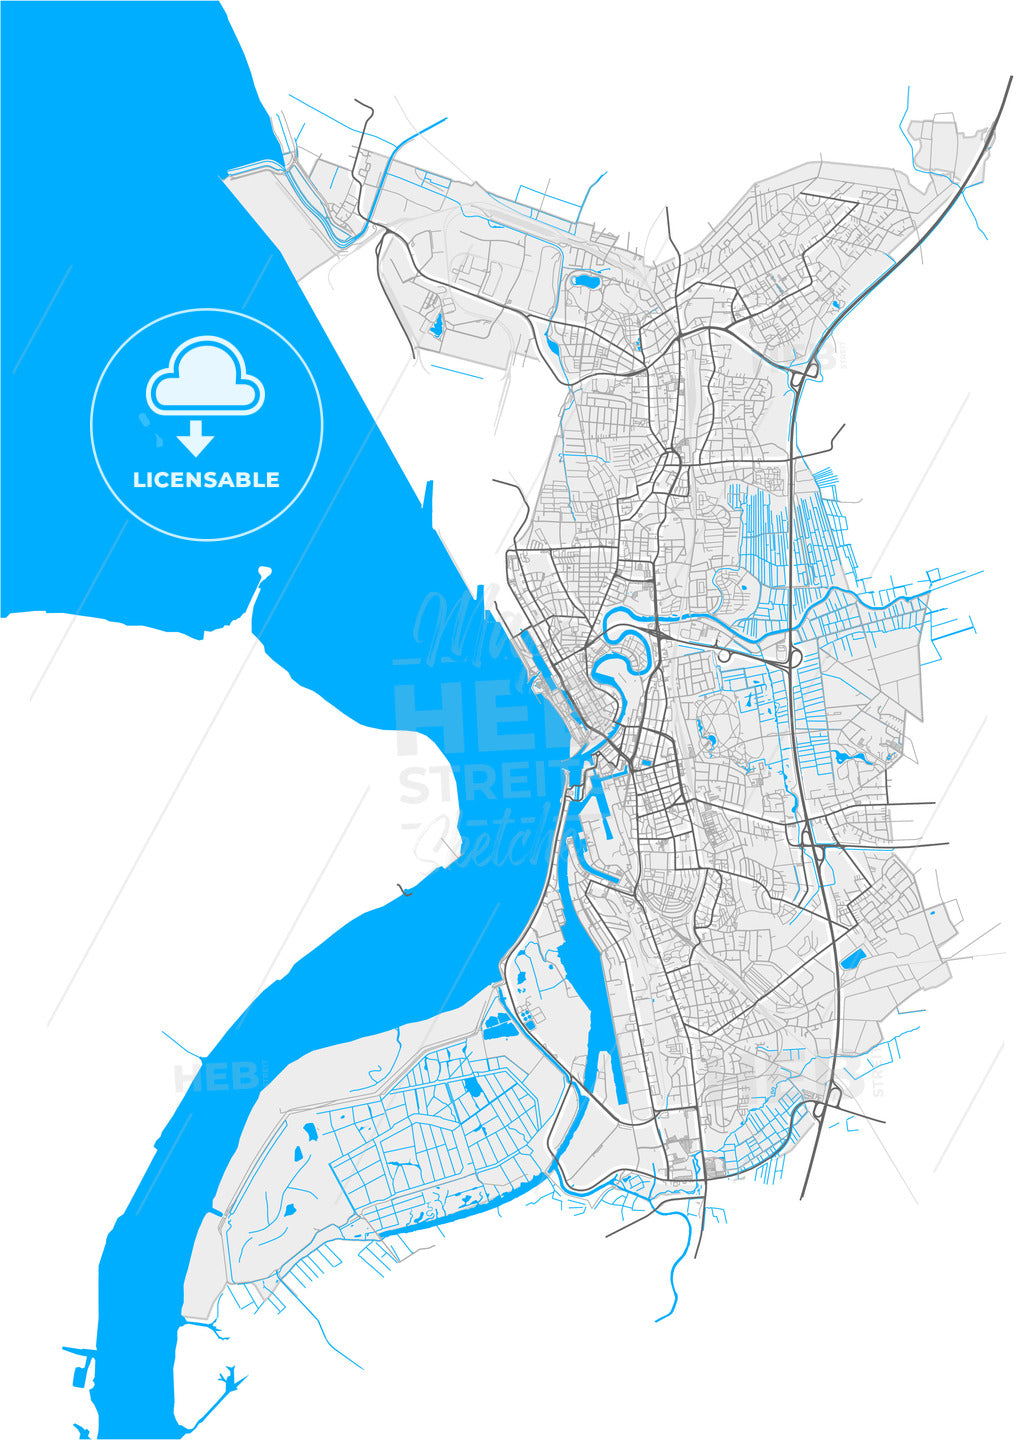 Bremerhaven, Bremen, Germany, high quality vector map